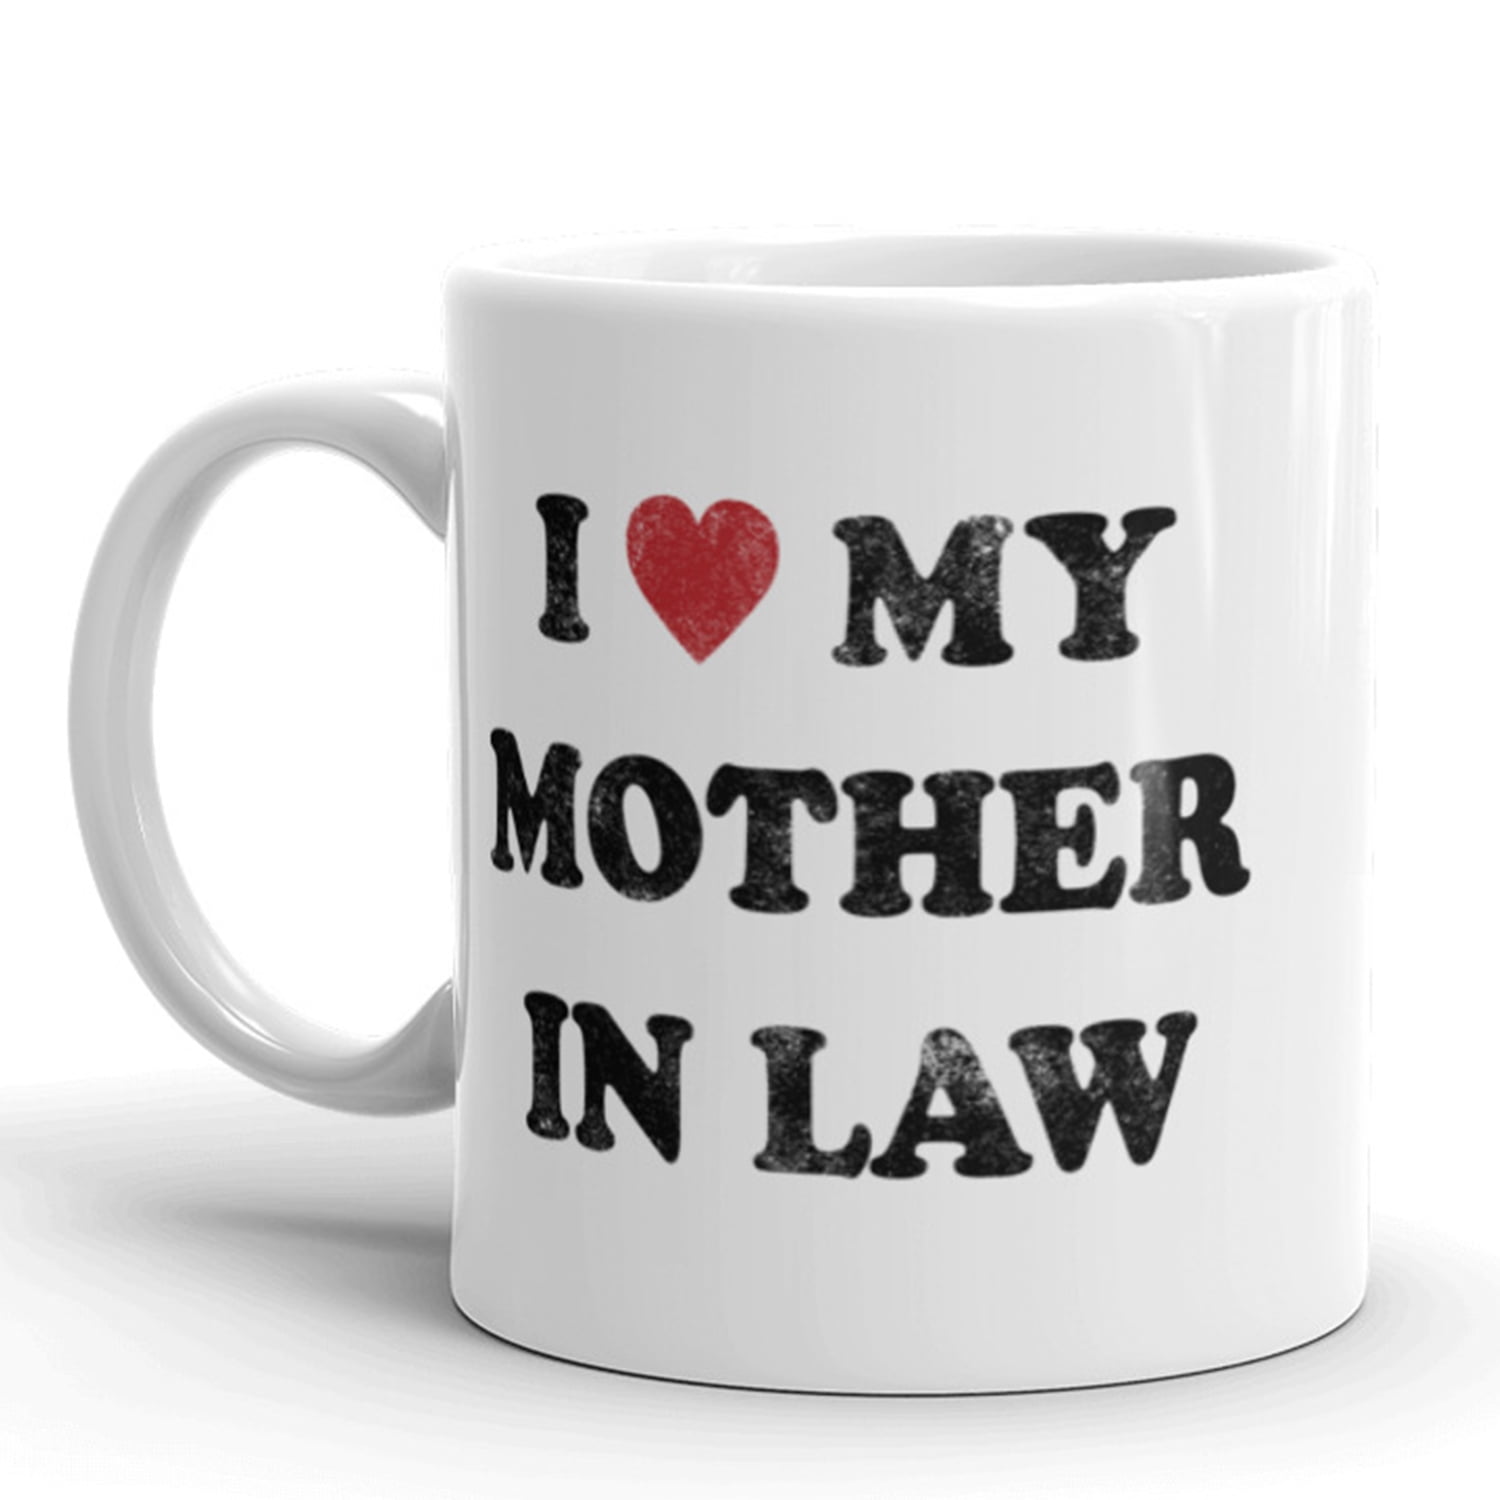 I Love My Mother In Law Coffee Mug Funny Sarcastic Ceramic Cup-11oz 